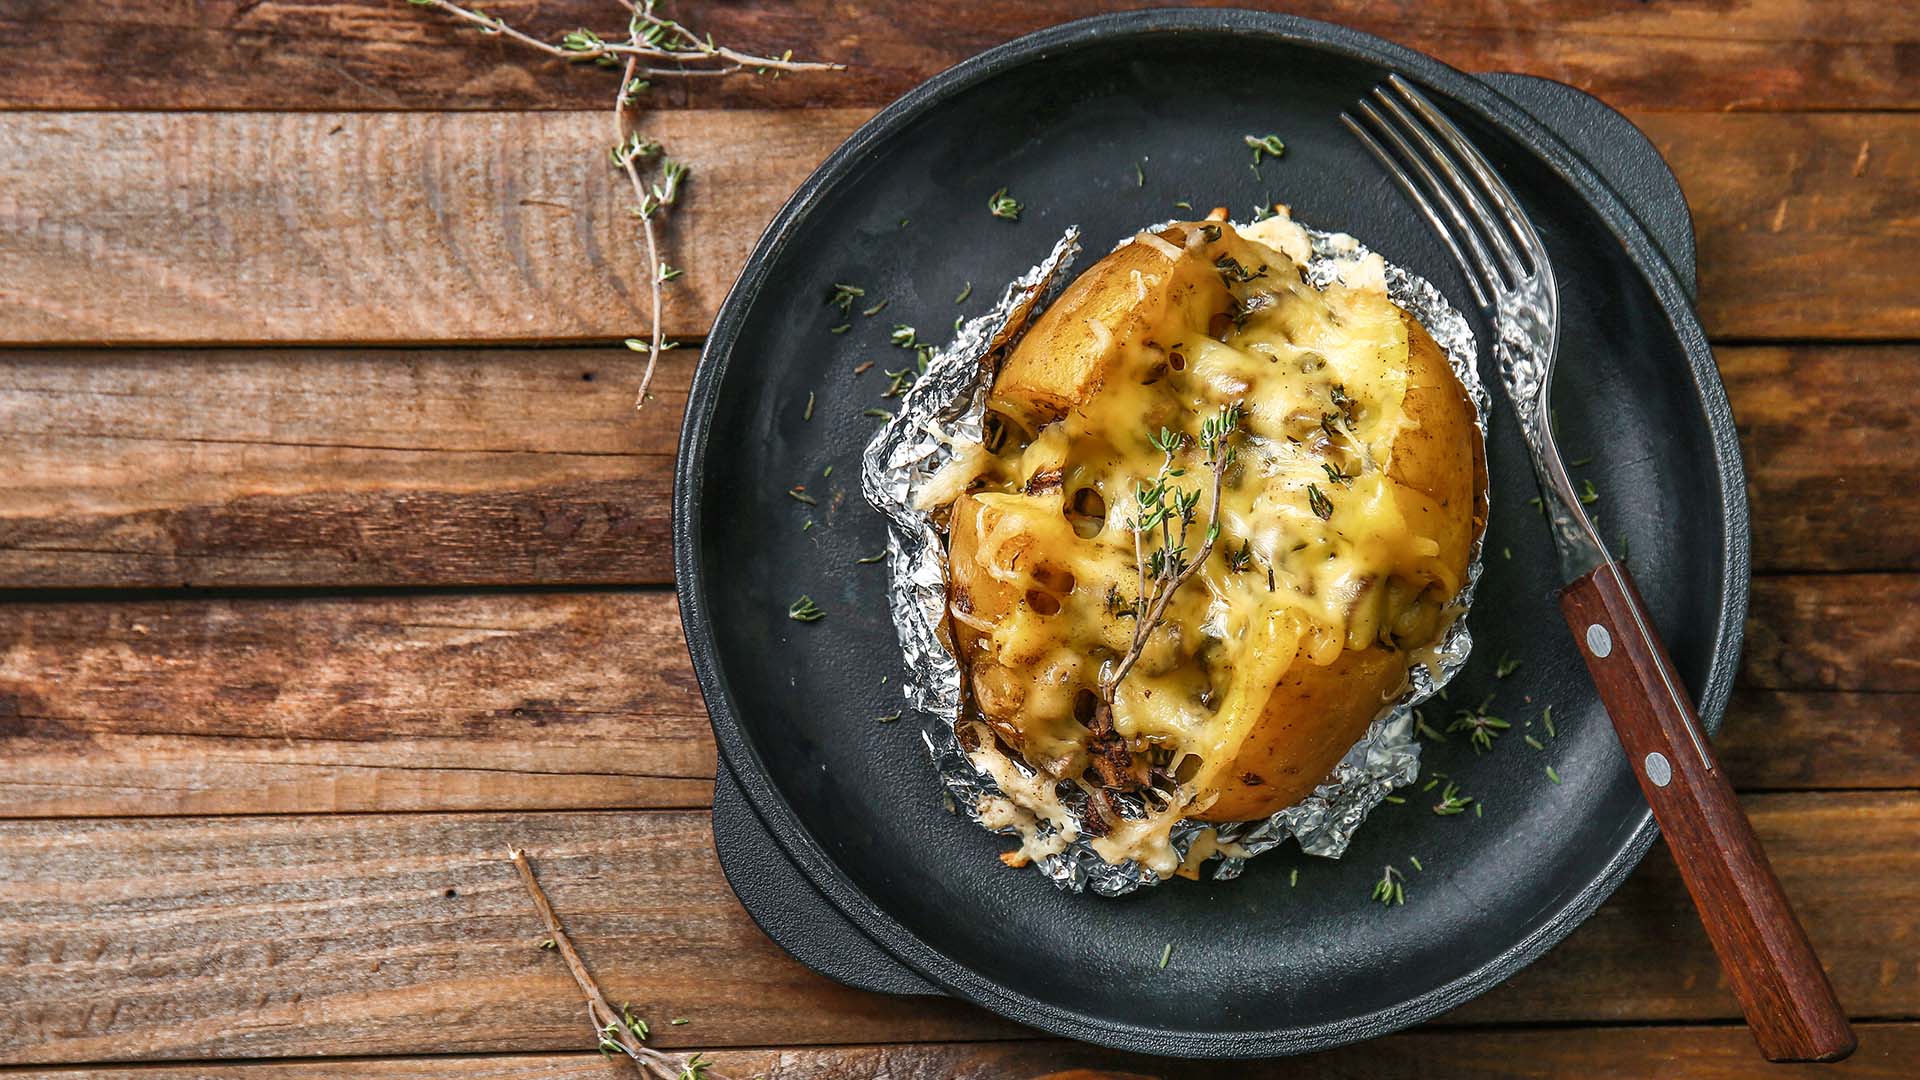 Overhead view of cheesy baked potato in tin foil next to a fork on a round black plate on a wooden surface. 